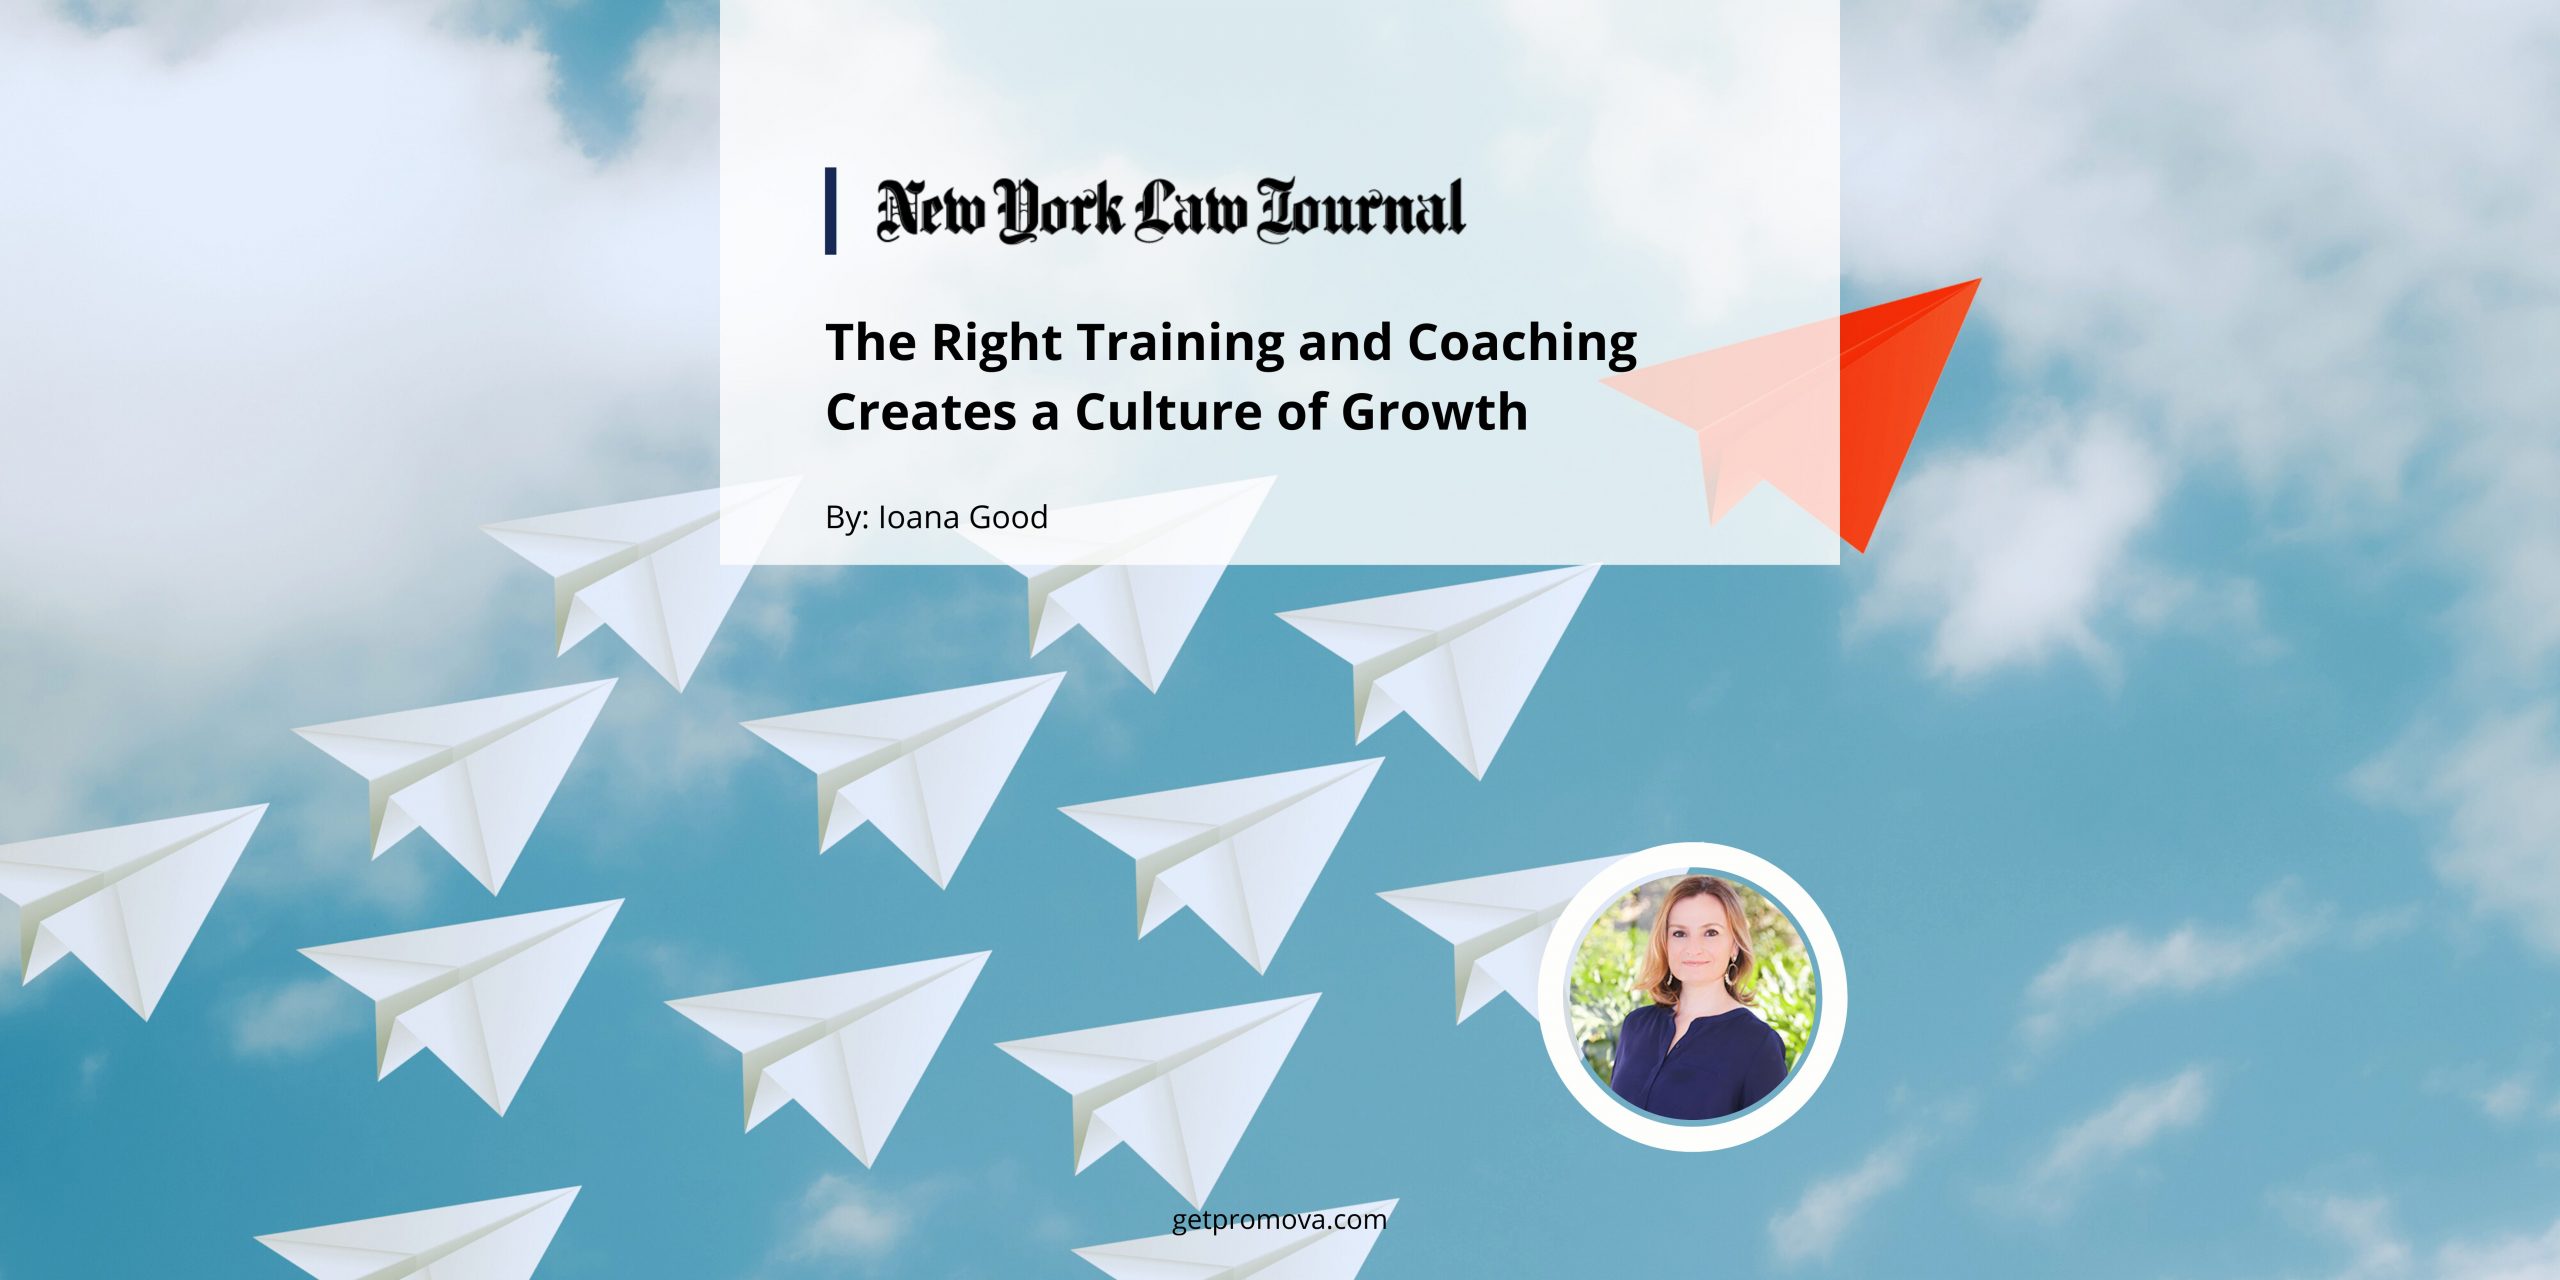 Featured image for “The Right Training and Coaching Creates a Culture of Growth”